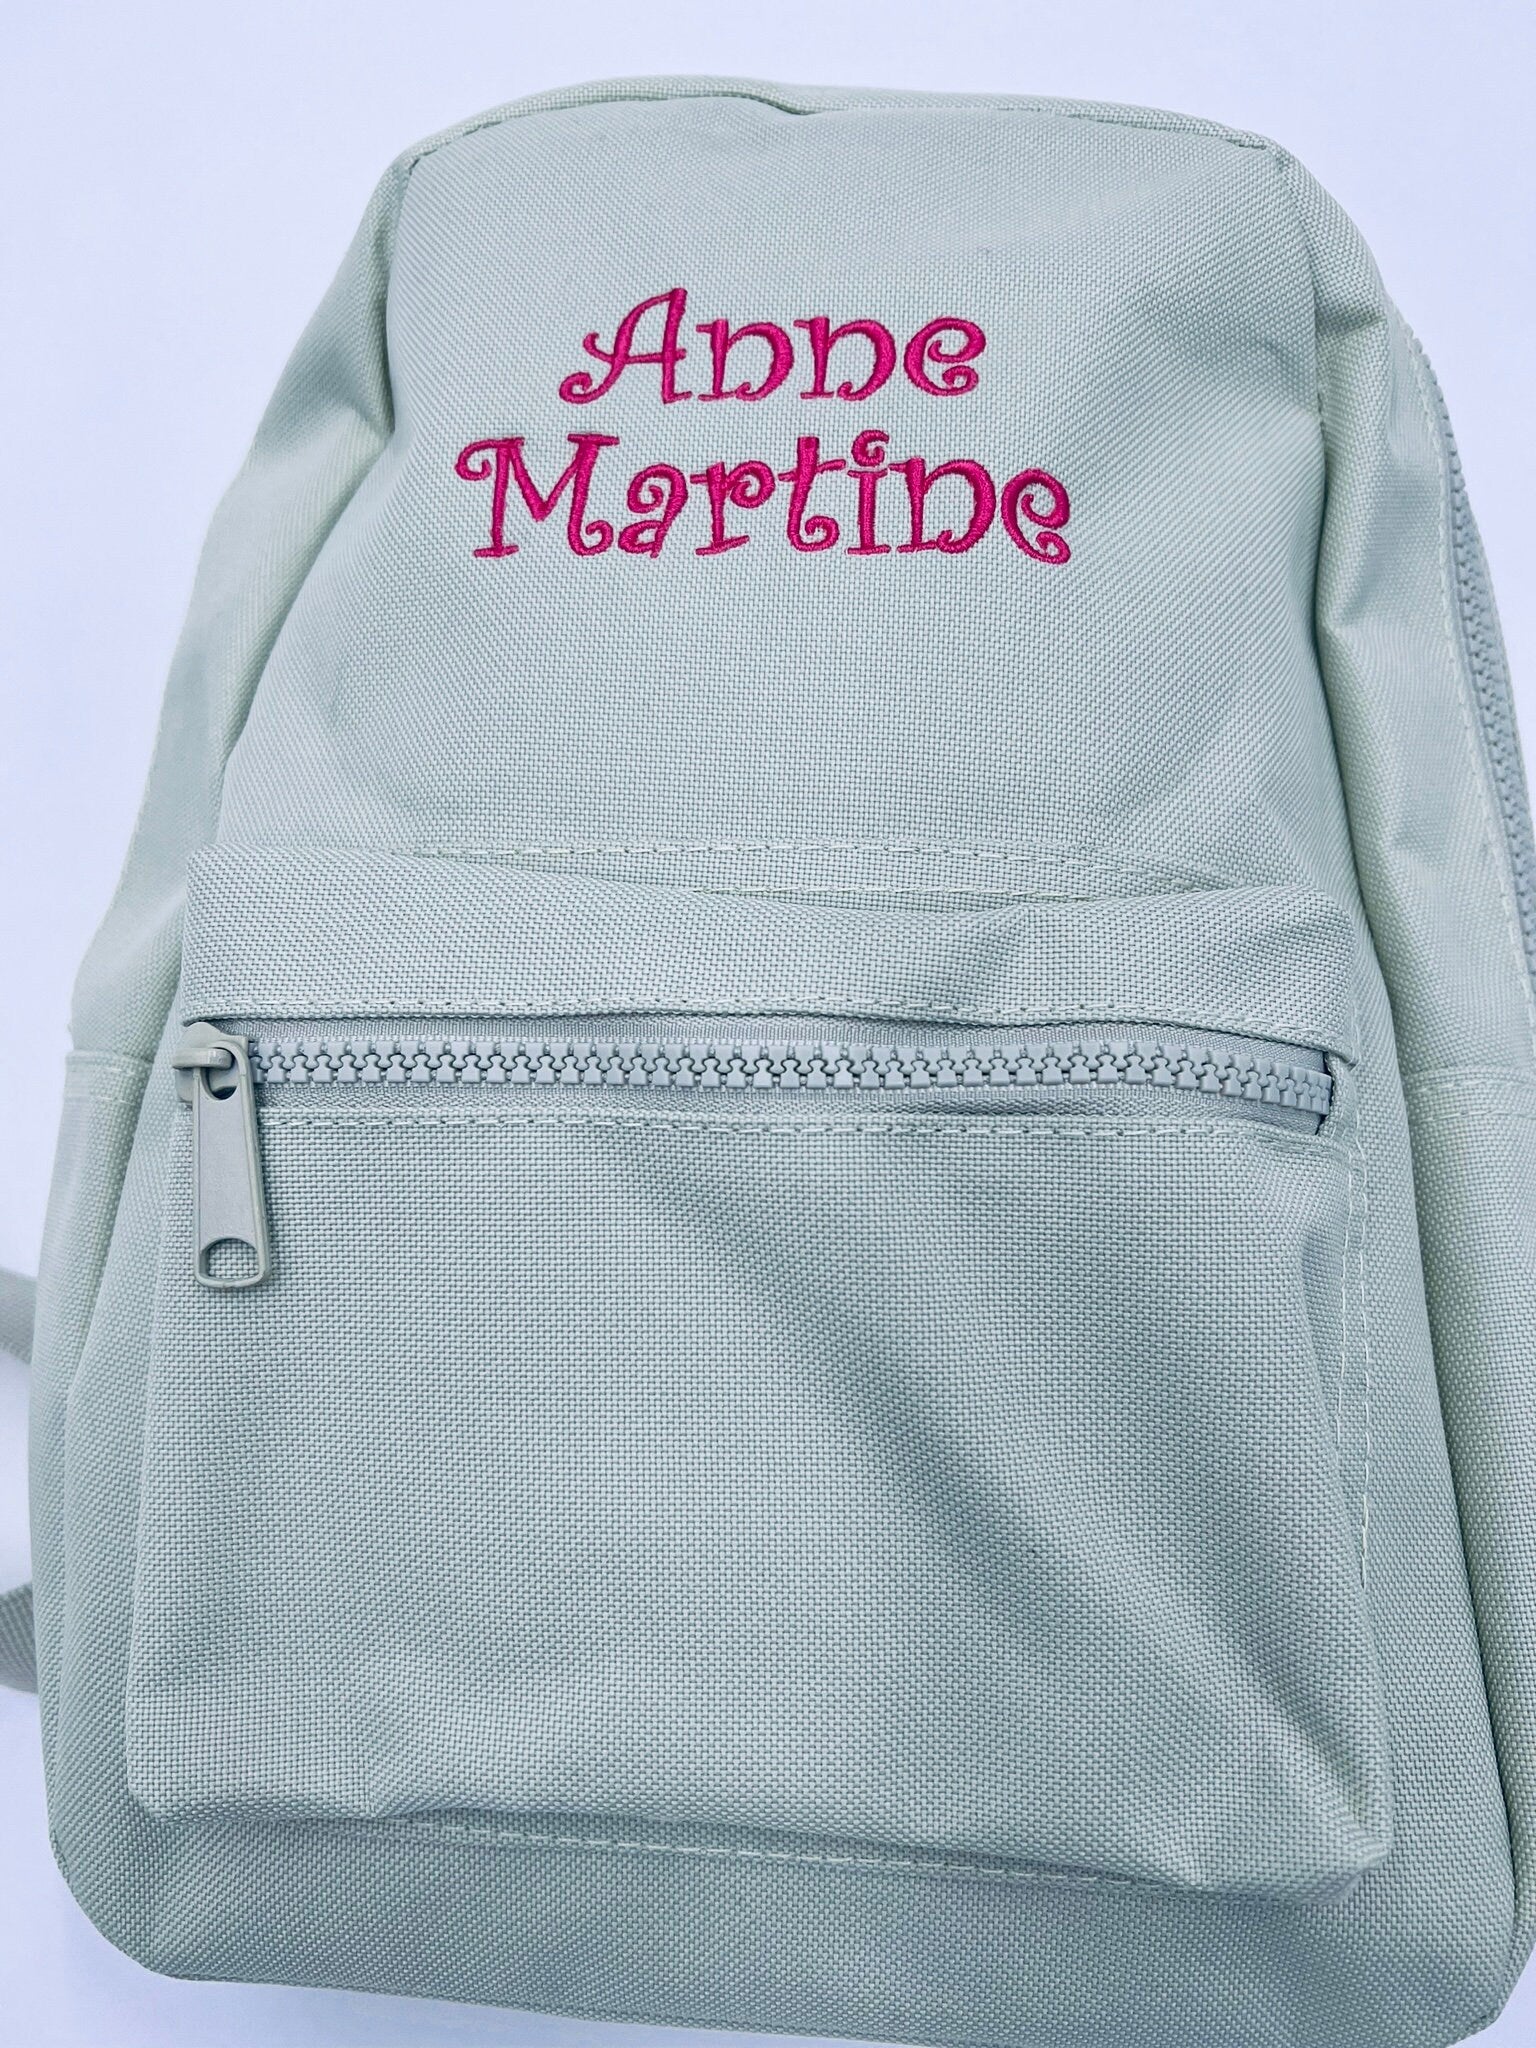 Personalized Mini Fashion Backpack for Kids and Adults, Backpack Purse, Birthday, Christmas, Travel Gift, Gift for Her